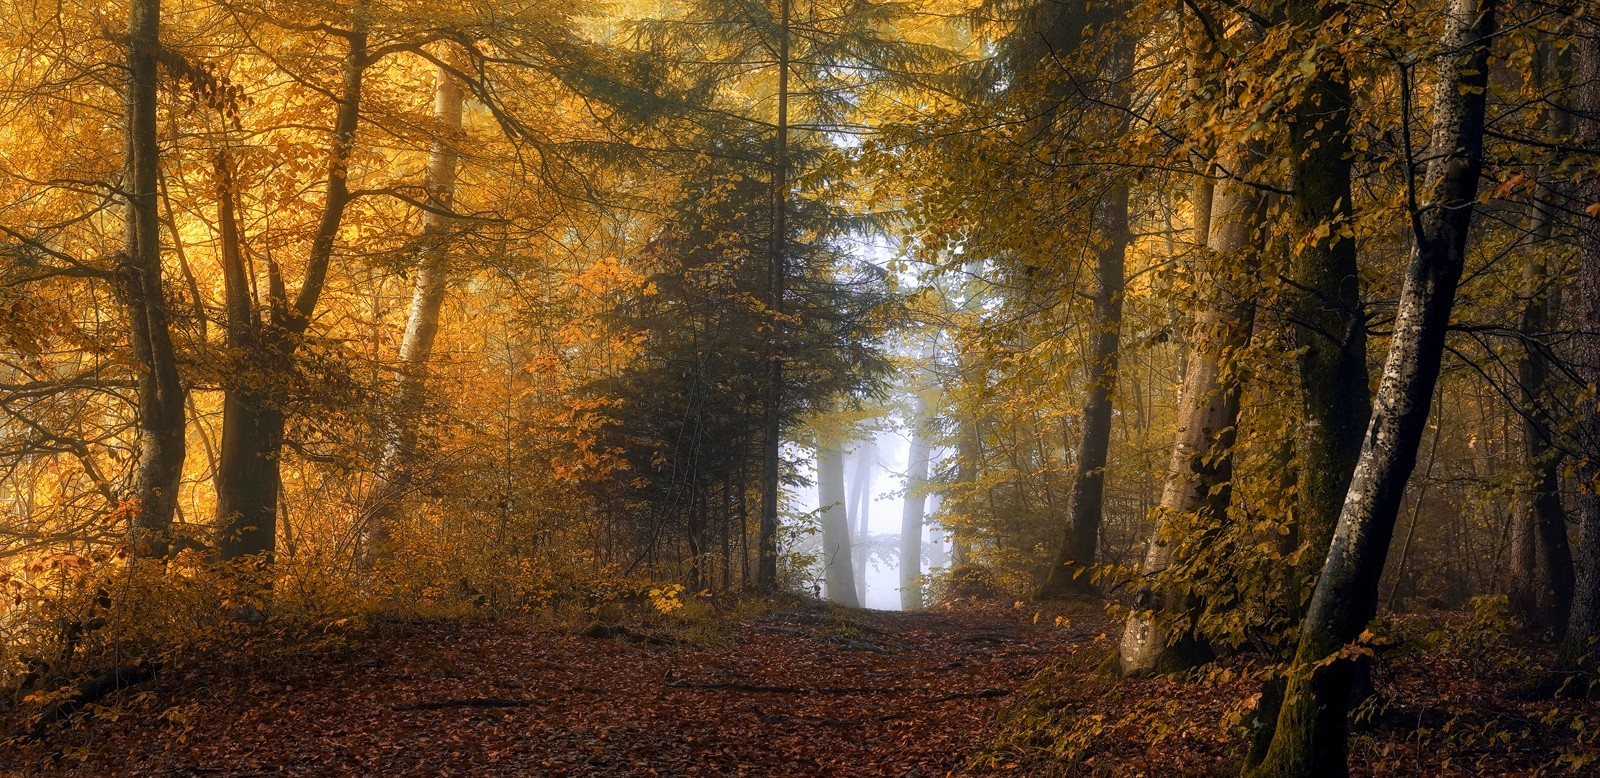 General 1600x778 nature mist forest fall yellow leaves path sunlight shrubs trees